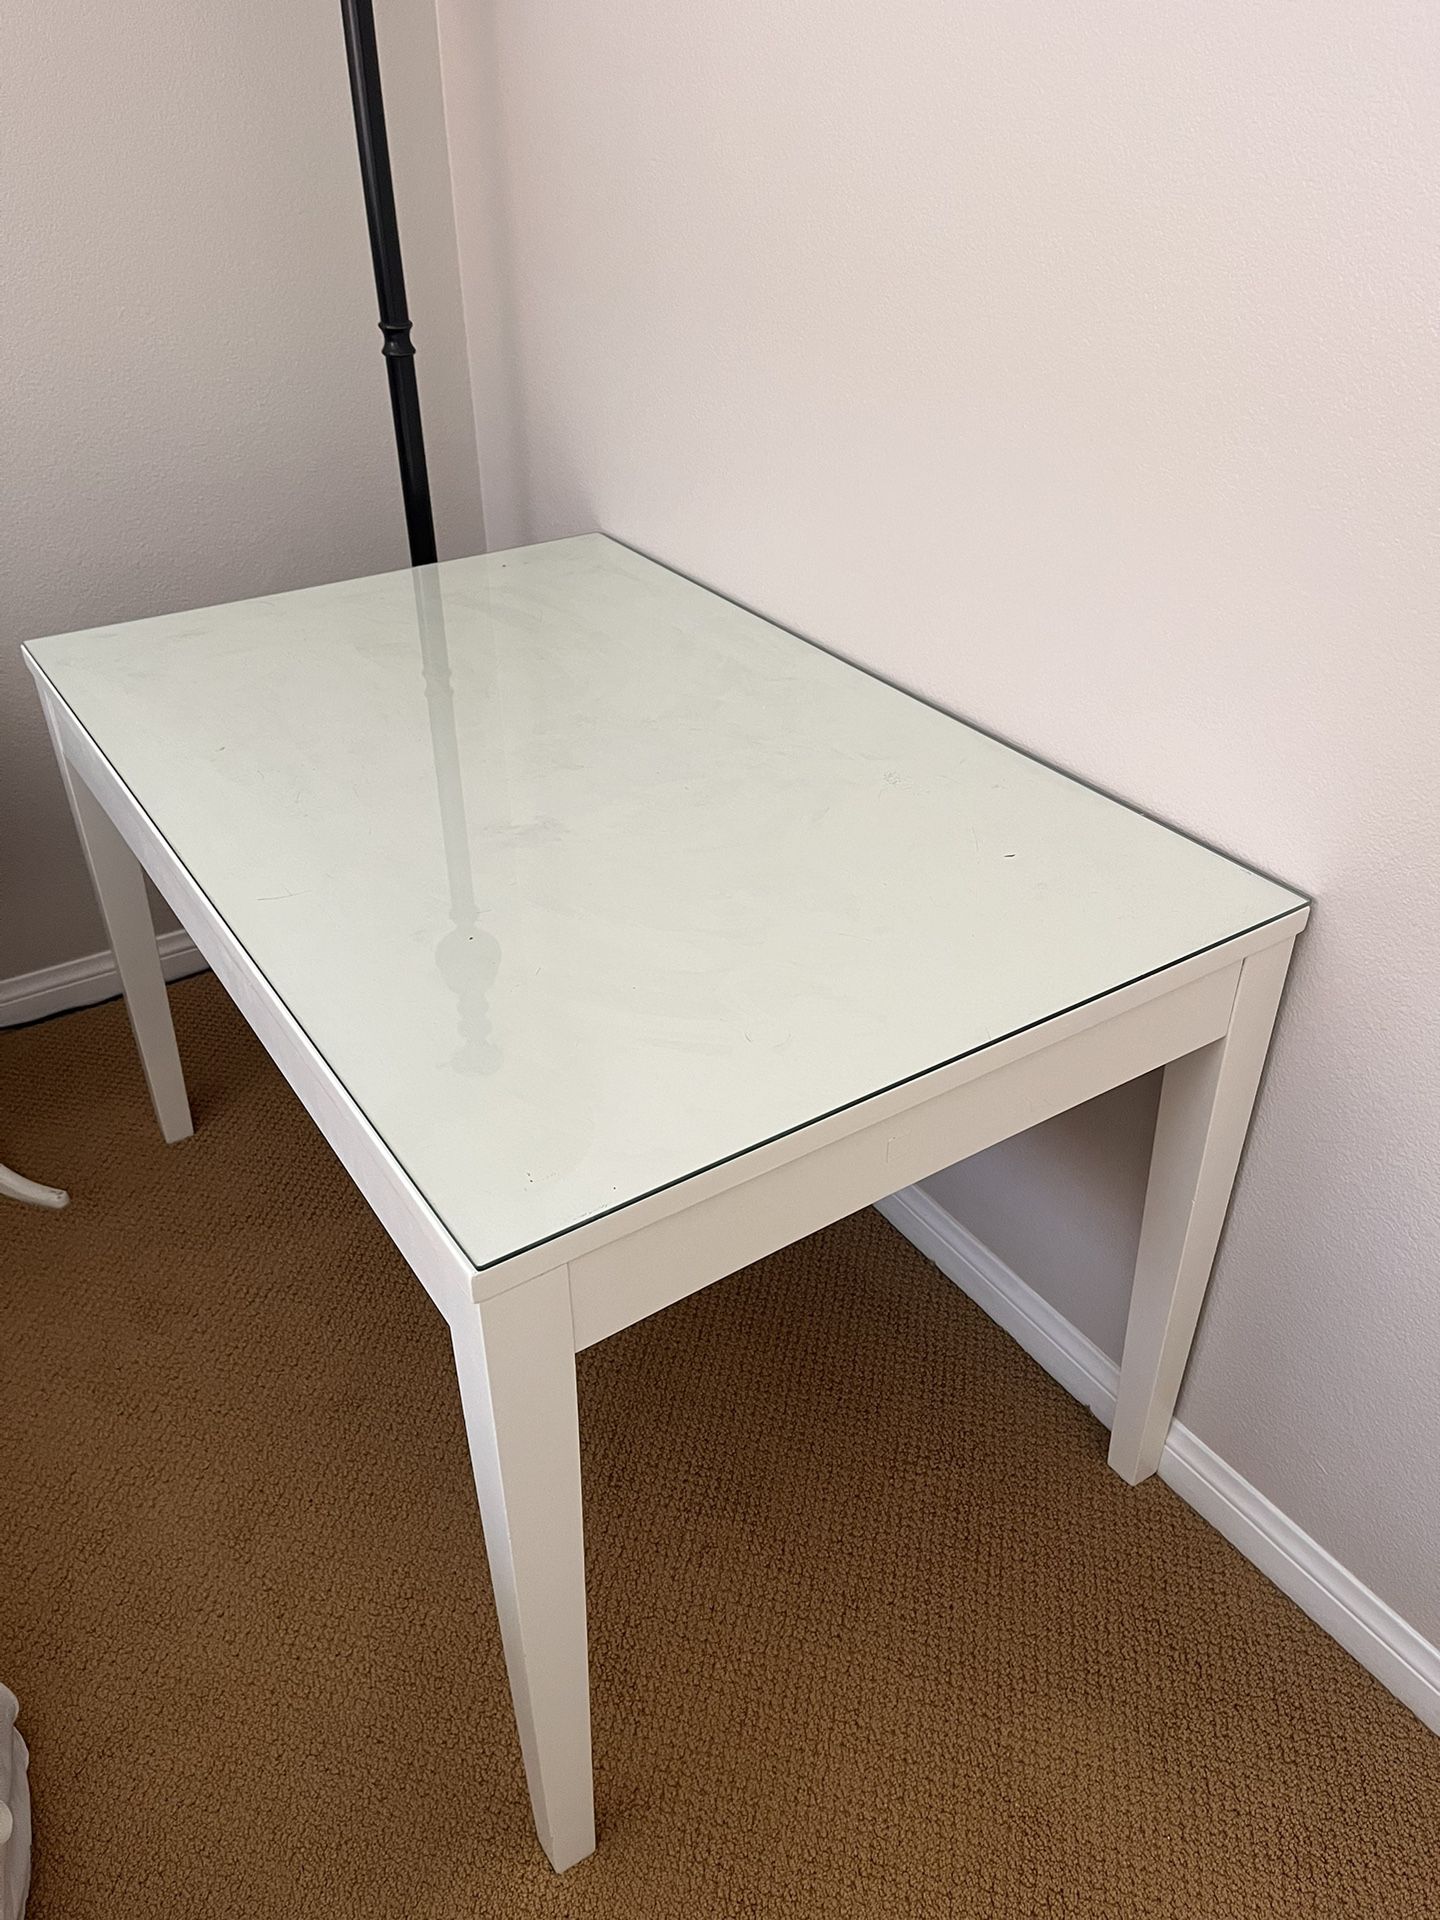 white work table (FREE) *on Hold*